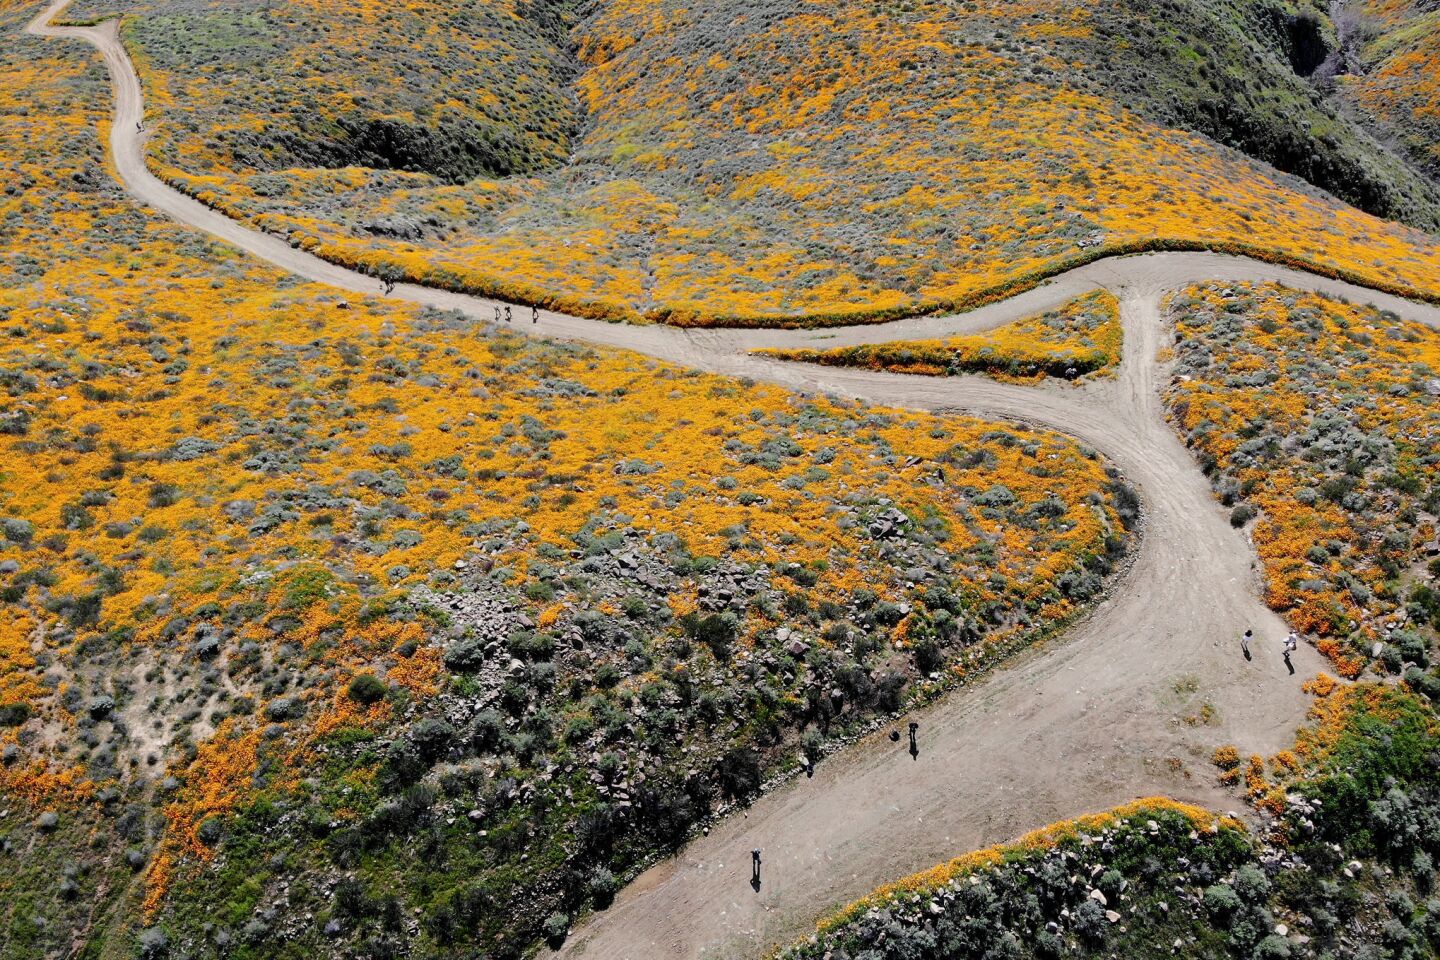 An aerial view of the flowers blanketing Walker Canyon.